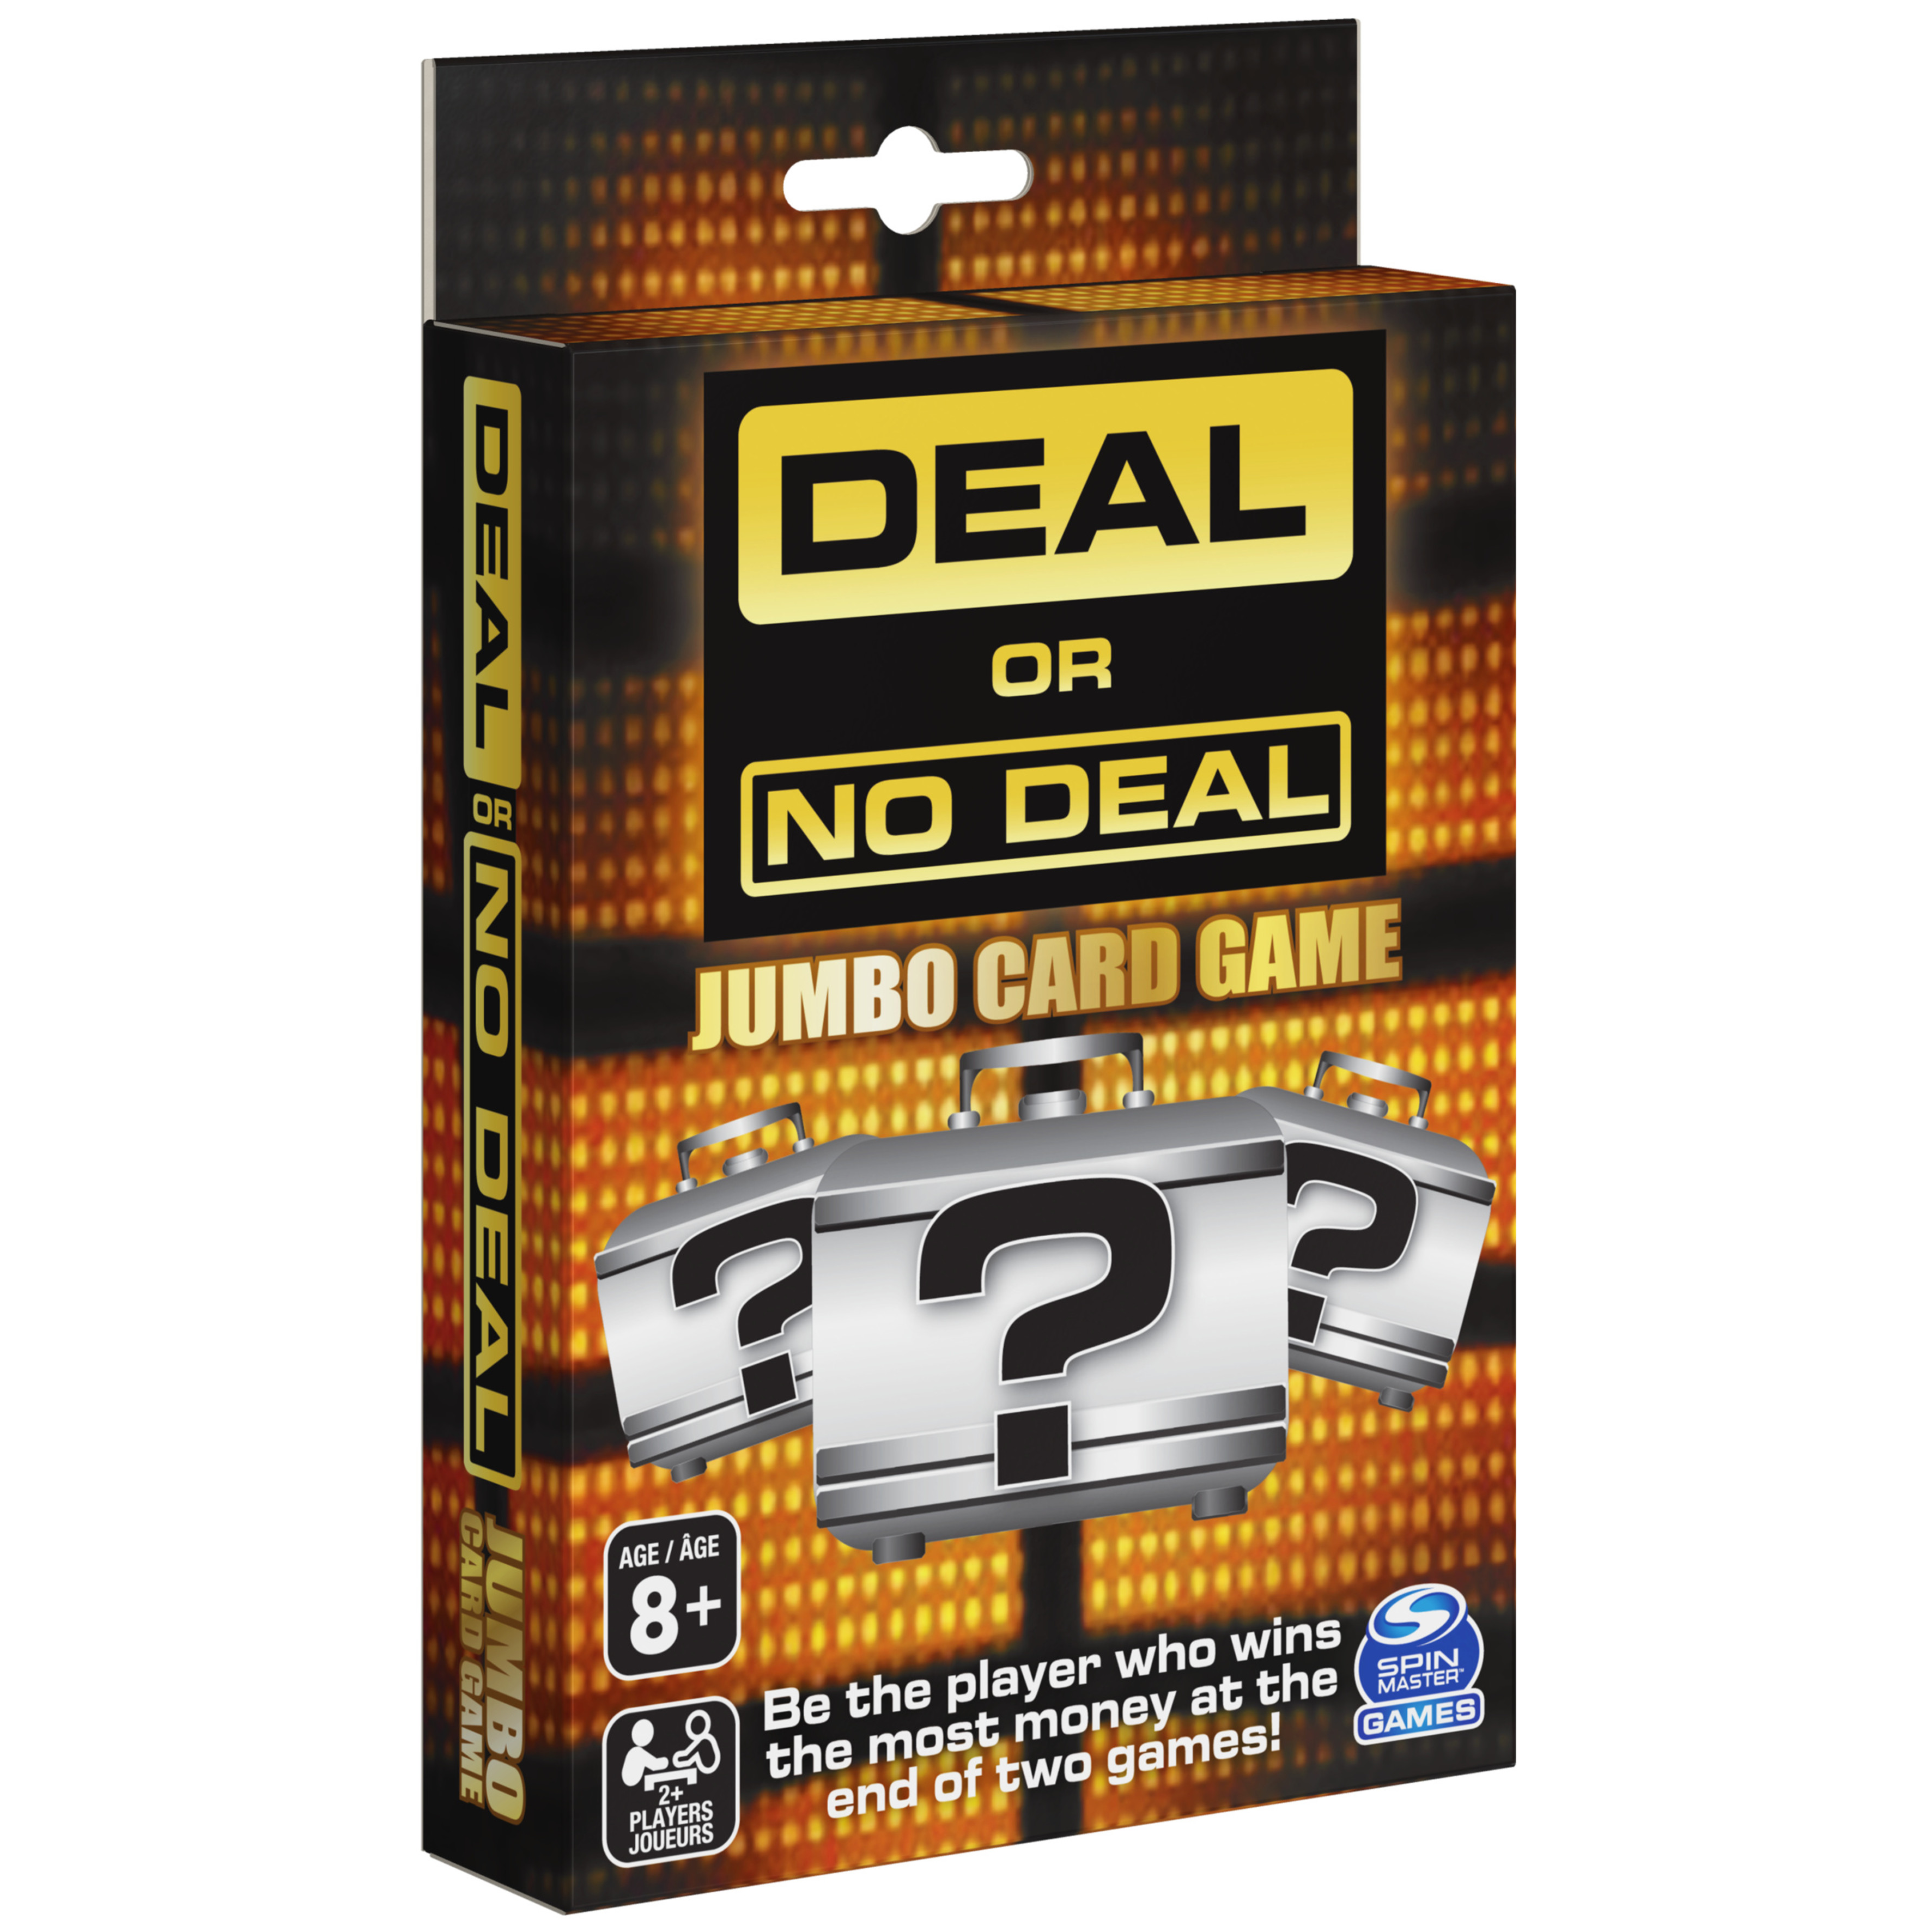 Deal or No Deal Game Show, Jumbo Card Game, For Families and Kids Ages 8 and up - image 5 of 7